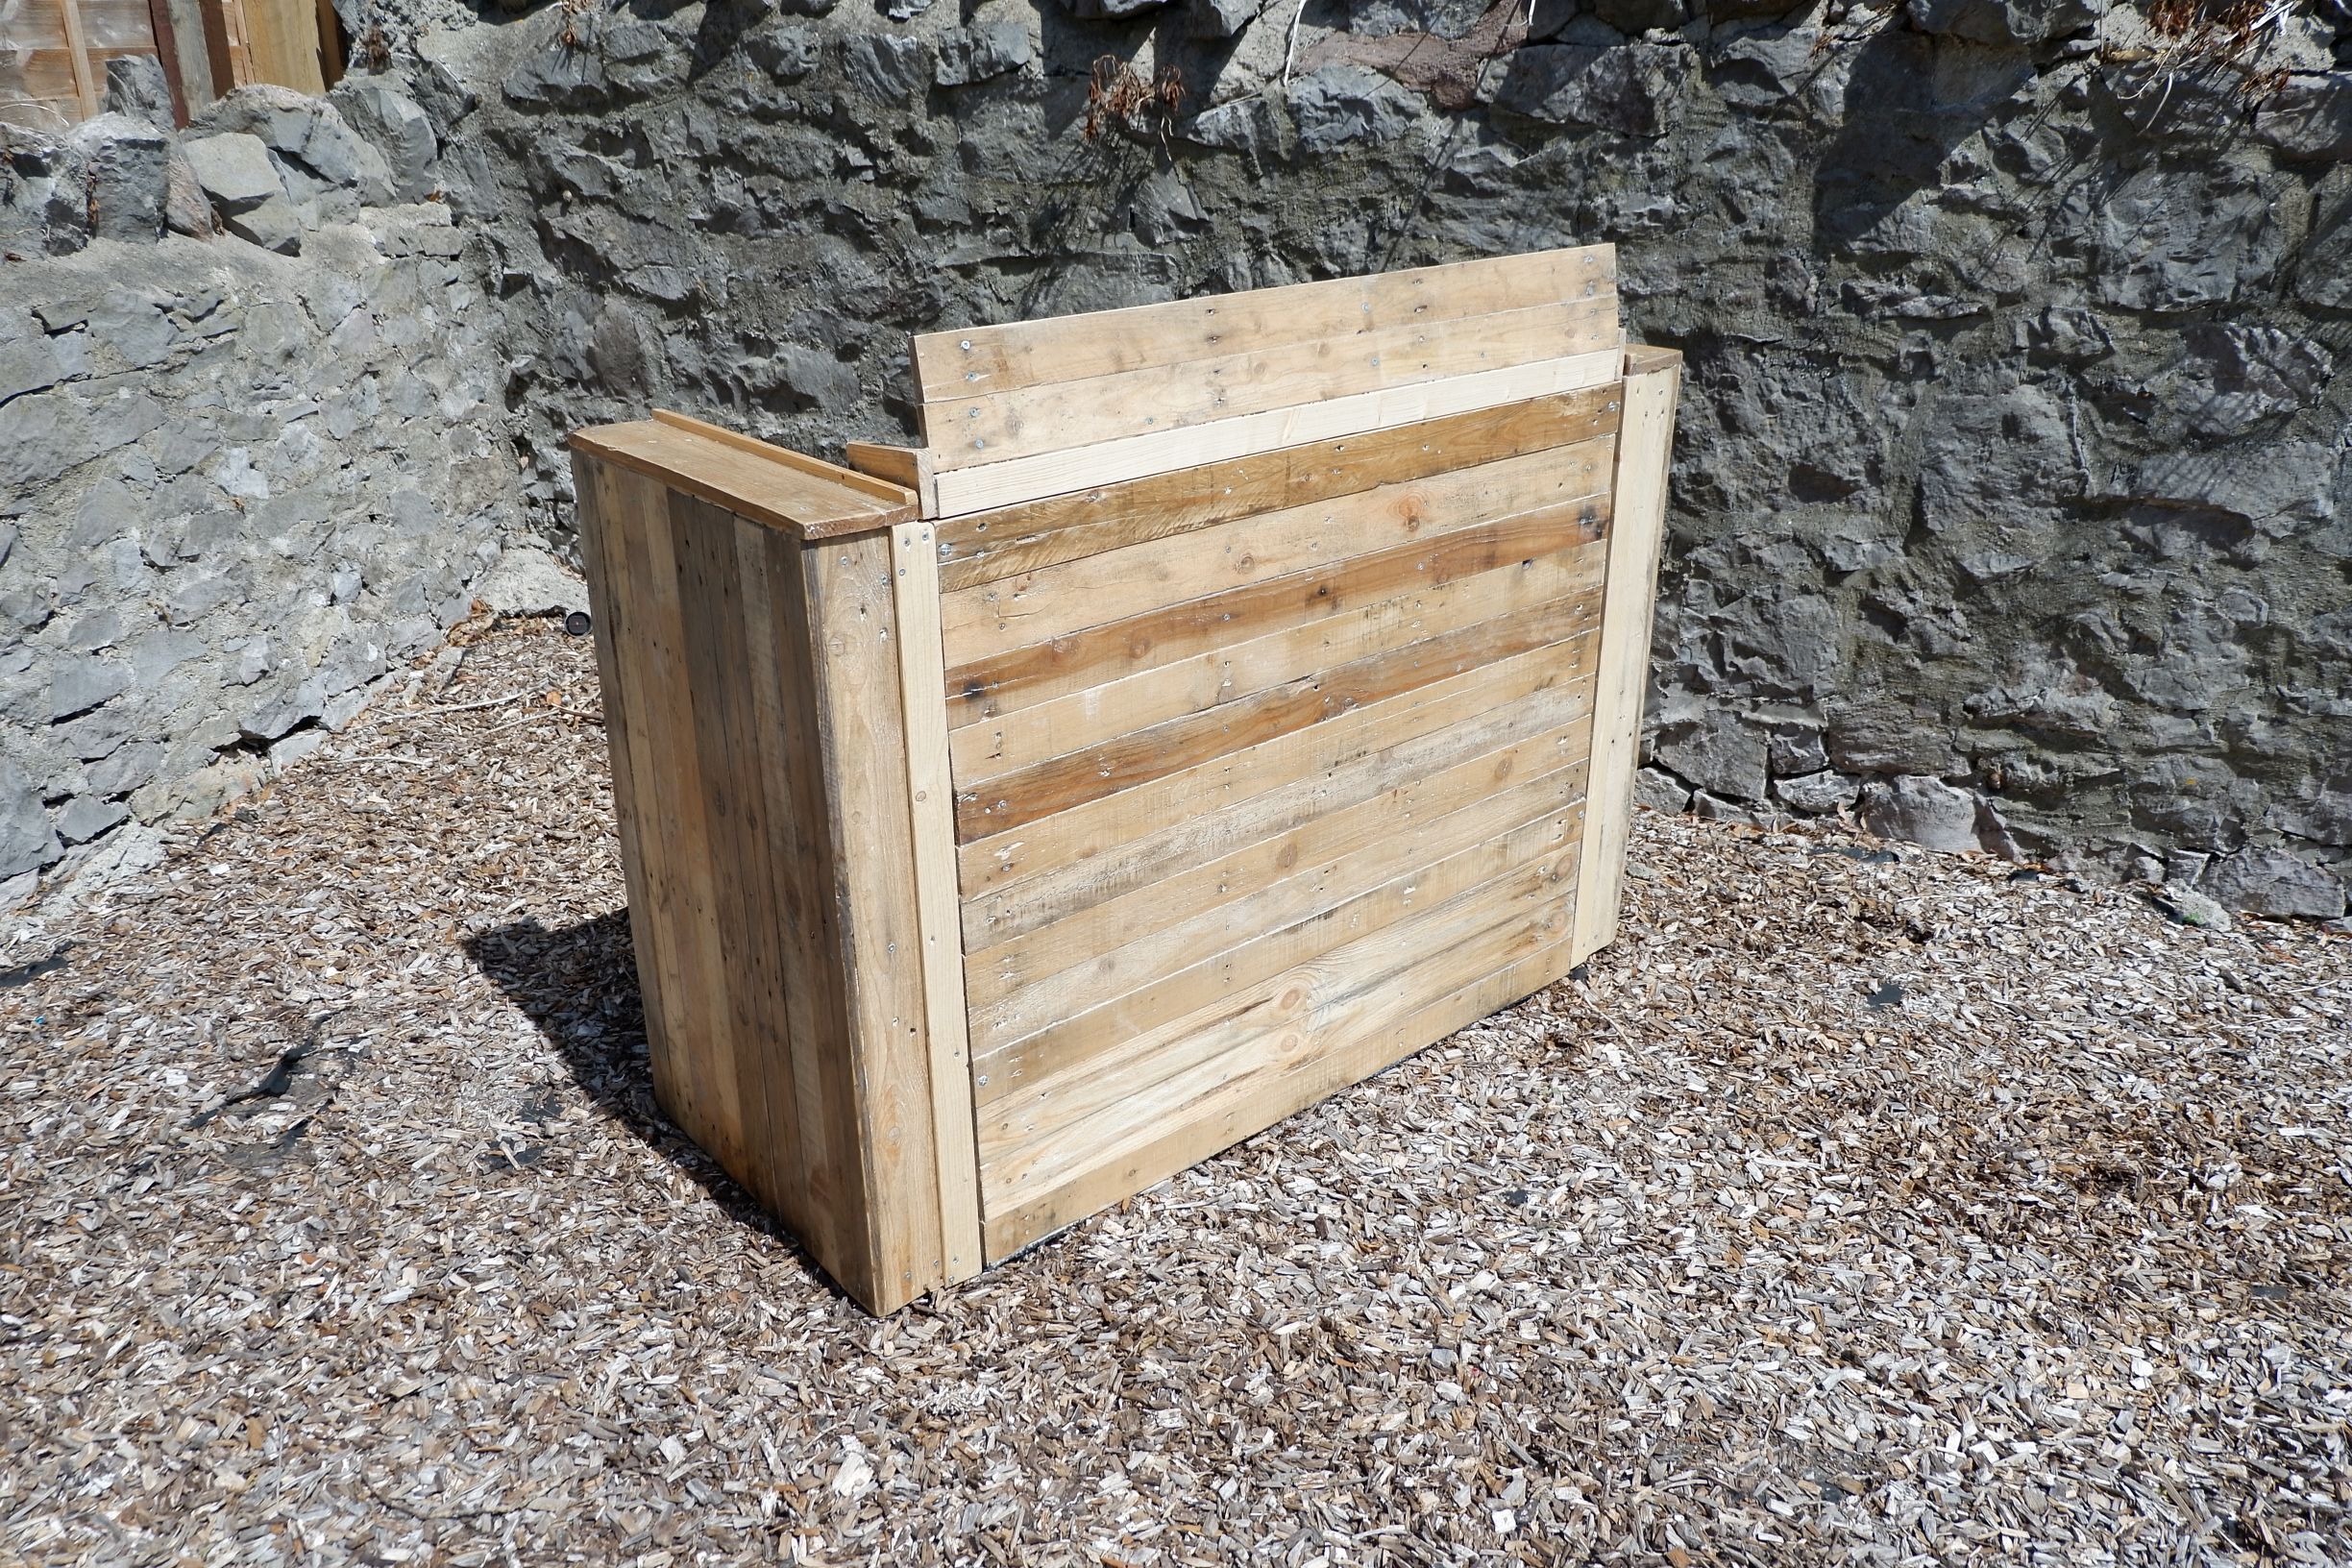 New for 2021 – Rustic DJ Booth….made during Lockdown